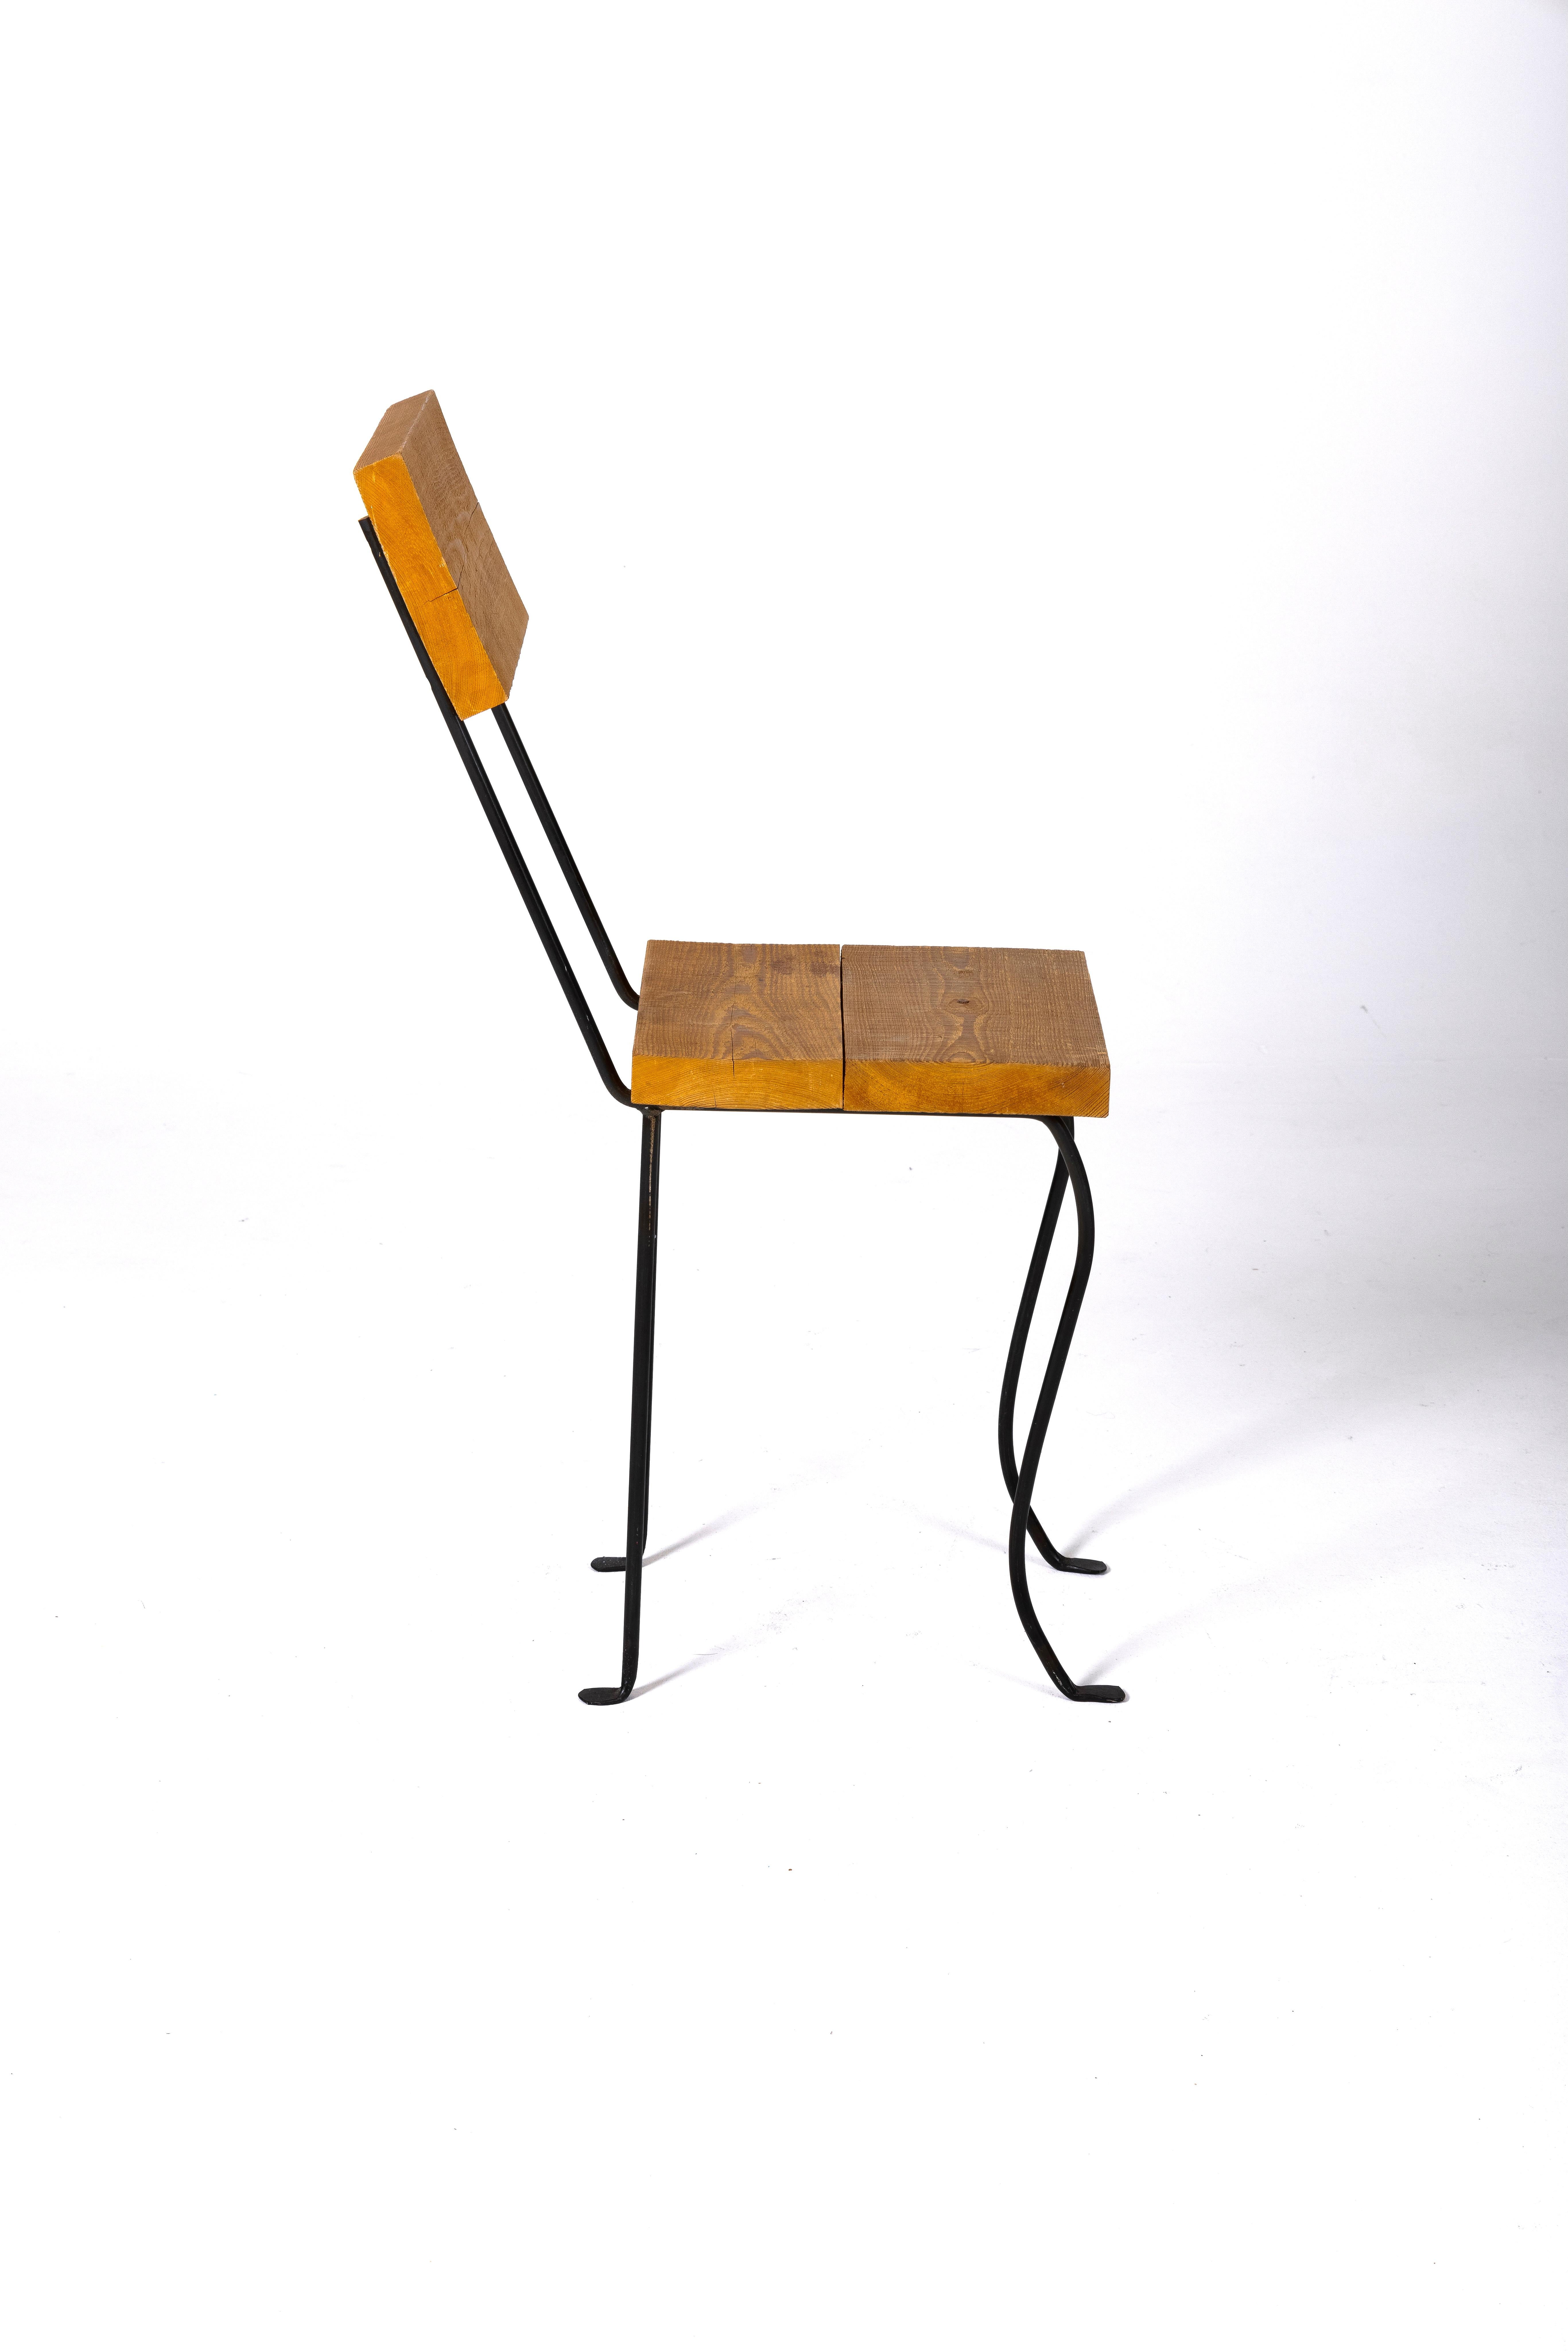 Wood and metal chair by Patrice Gruffaz For Sale 5